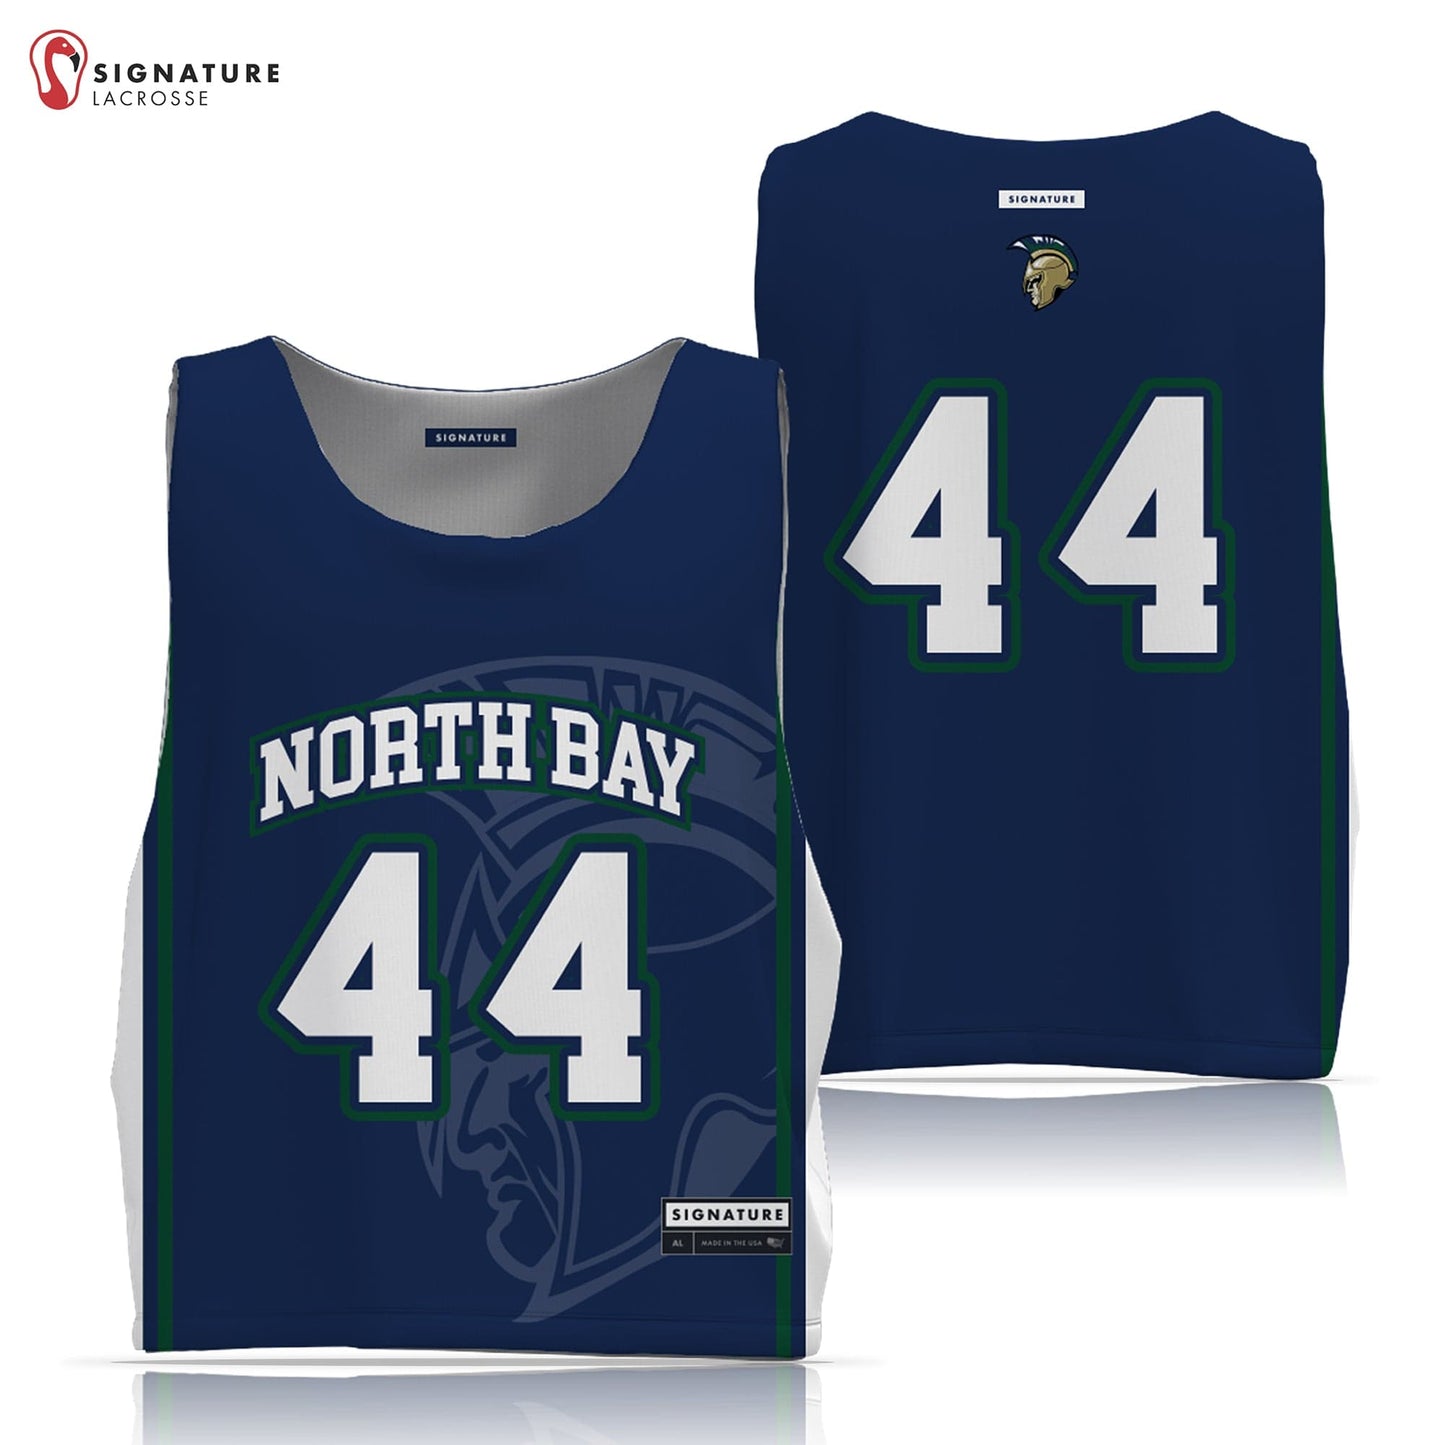 North Bay Warriors Lacrosse Men's 3 Piece Player Game Package Signature Lacrosse